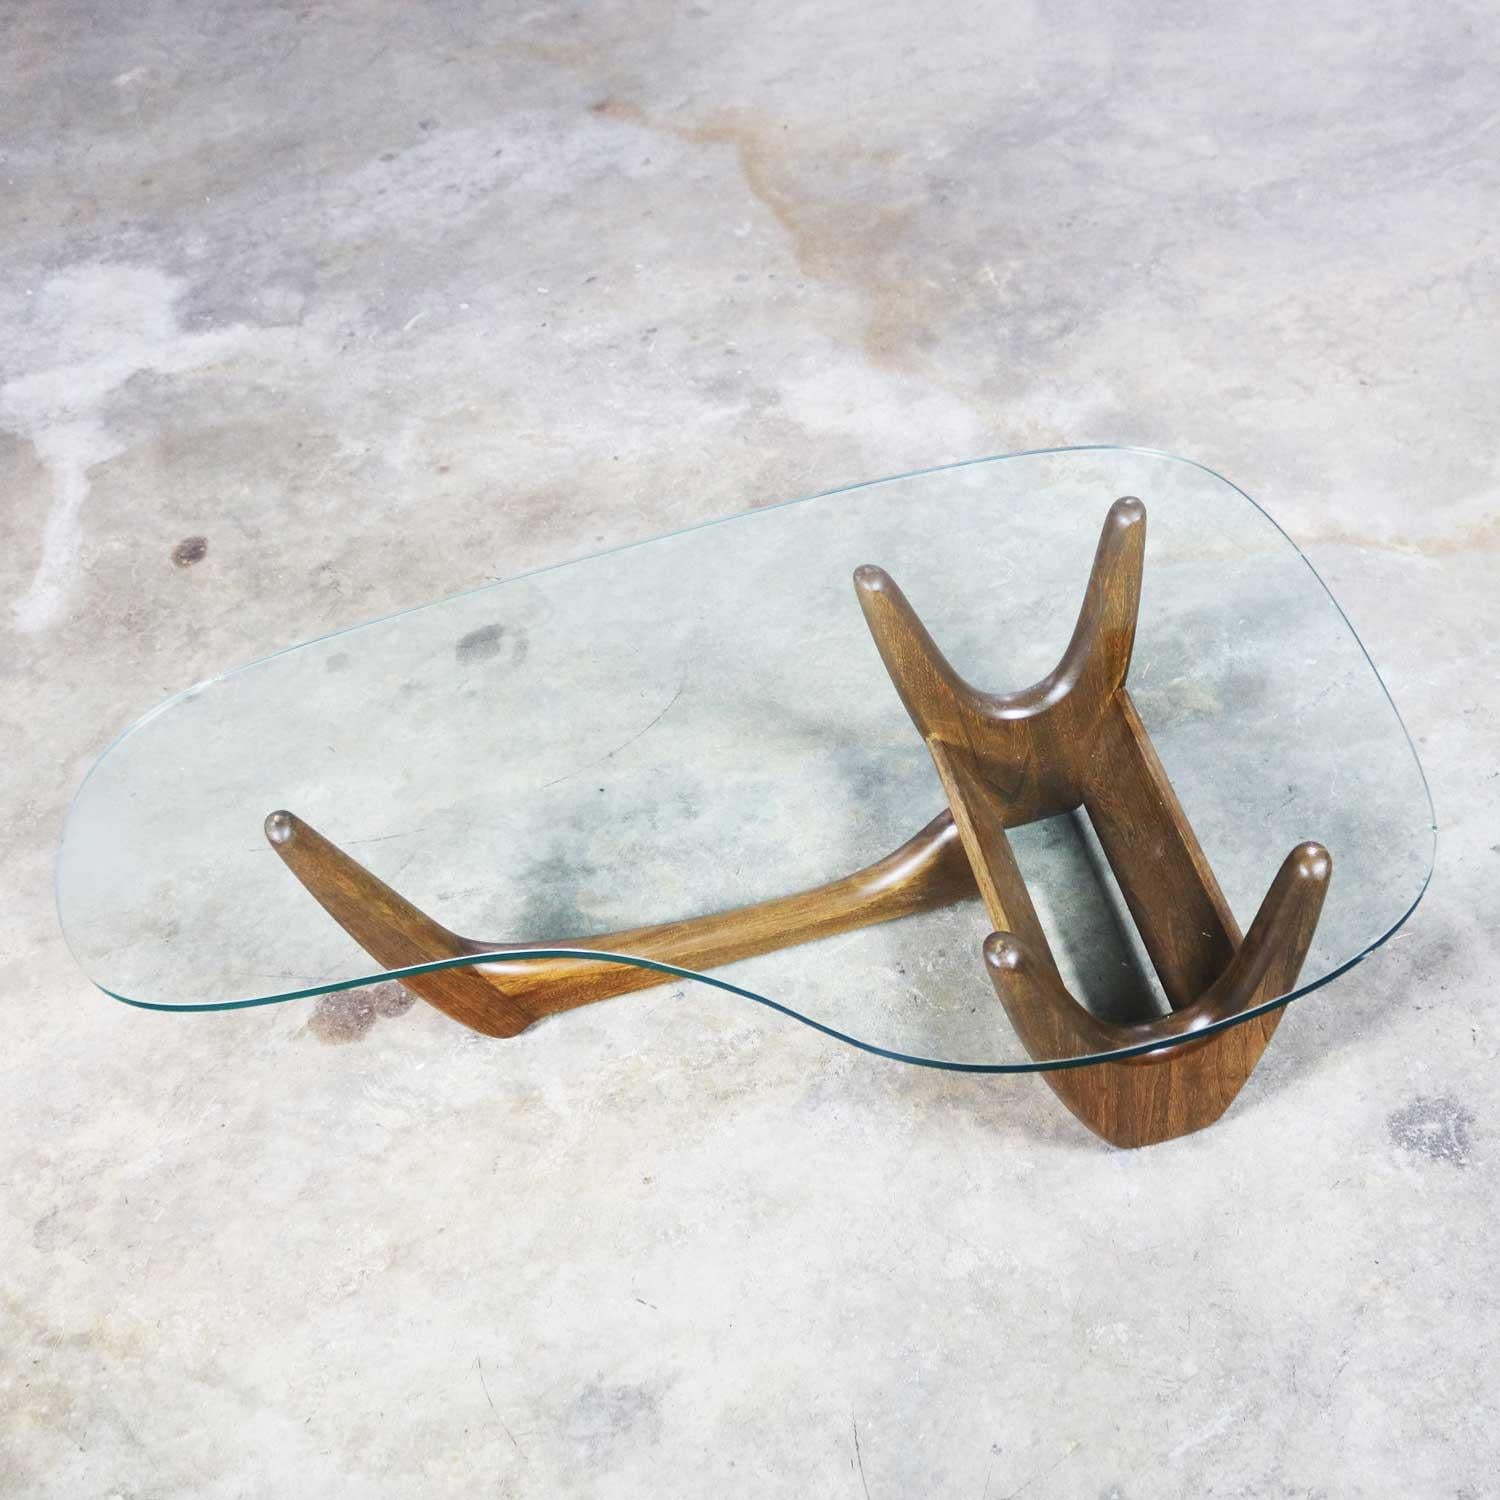 20th Century Mid-Century Modern Biomorphic Coffee Table Attributed to Kroehler or Tonk